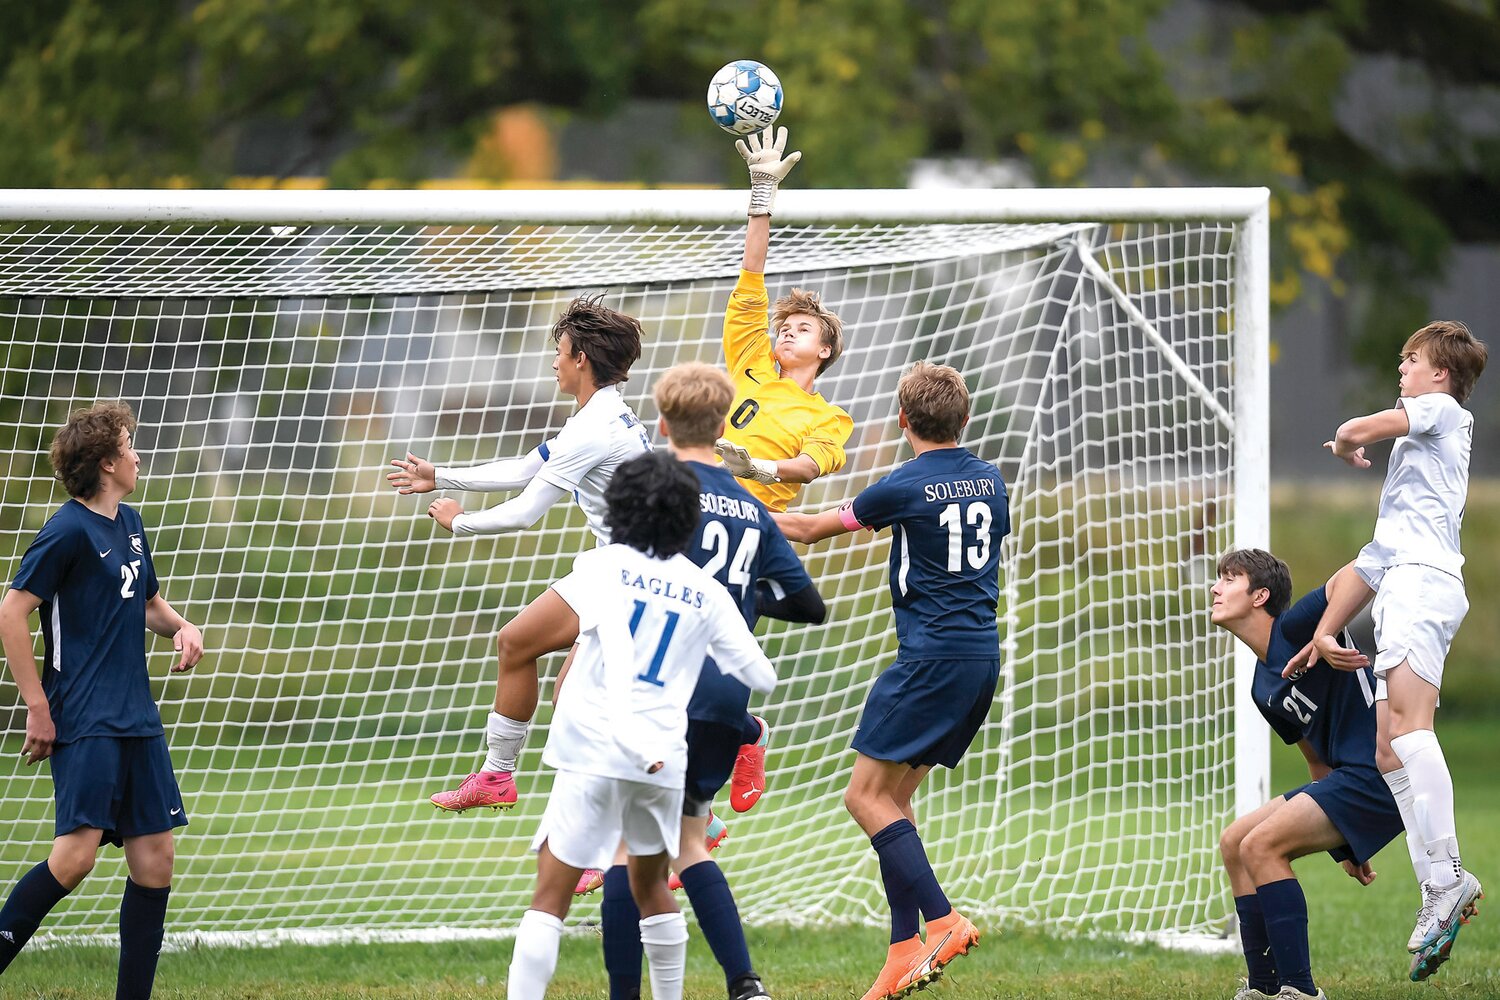 Solebury School goalie Laszlo Fabritius makes a save on corner kick in the opening minute of the first half.